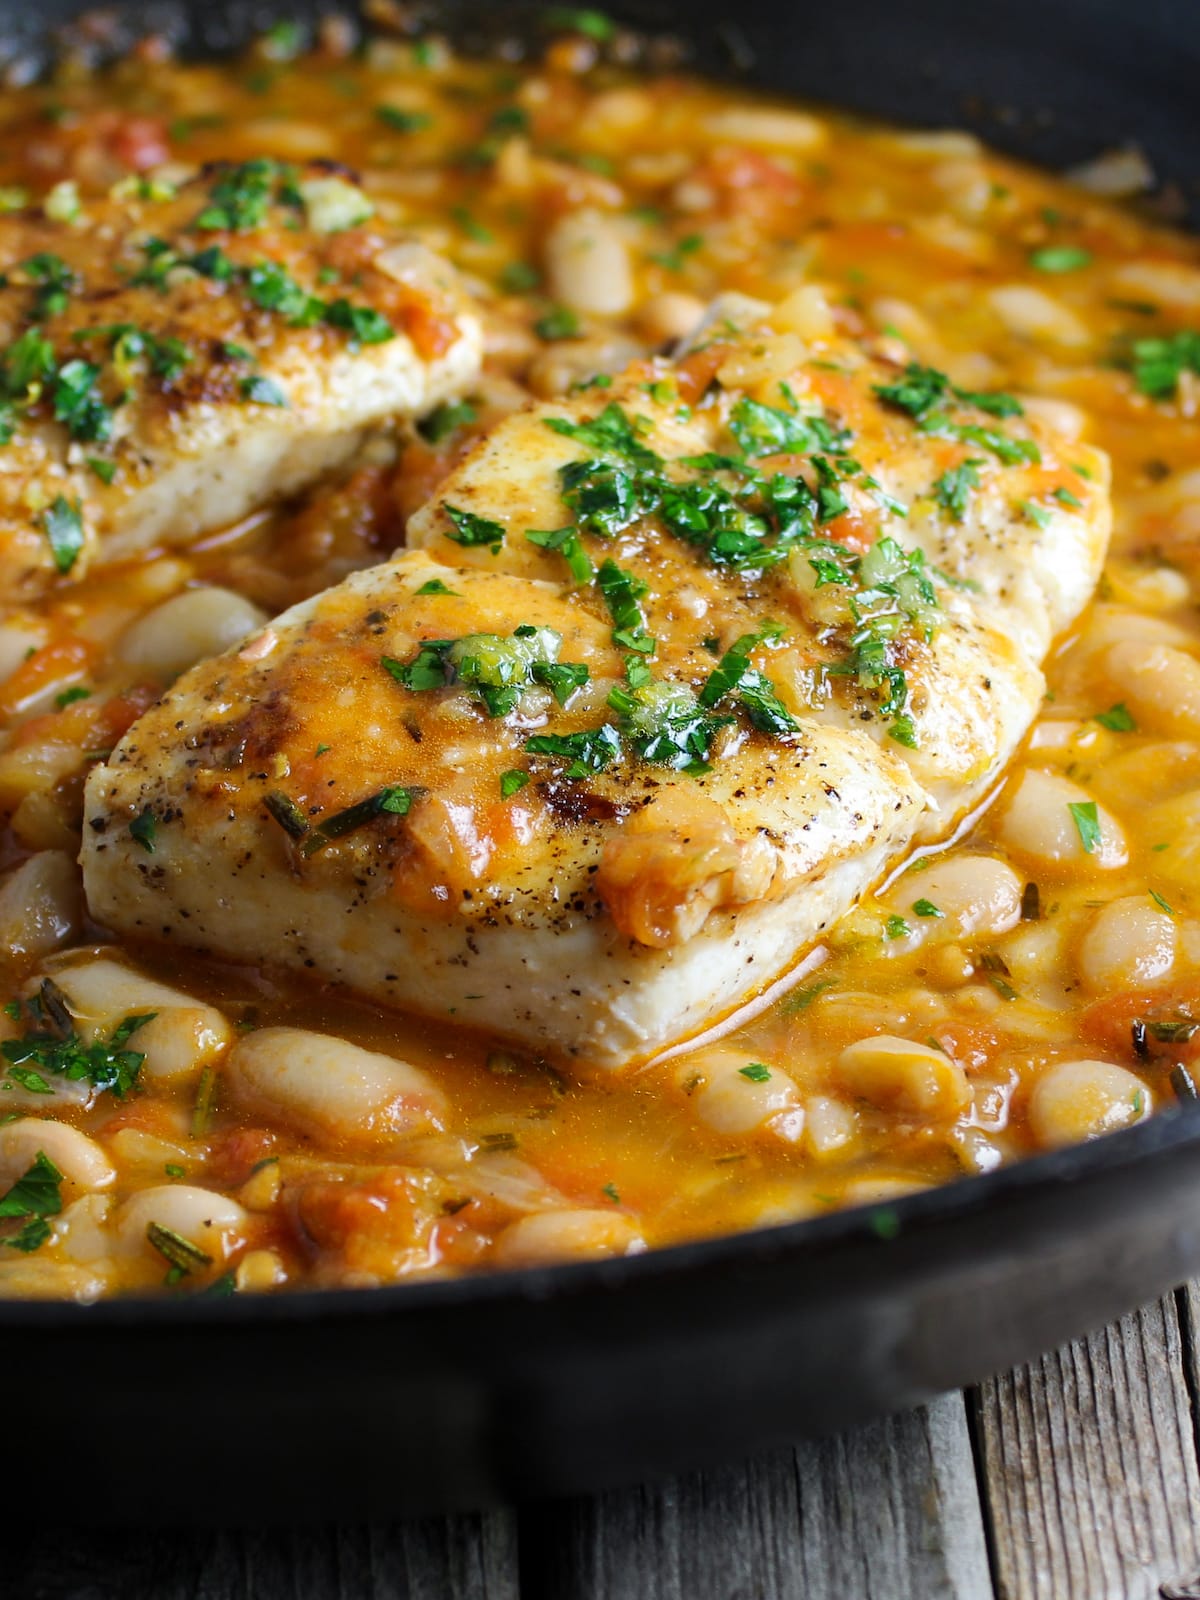 Halibut sauteed in a pan with white beans, chicken broth, and tomatoes.